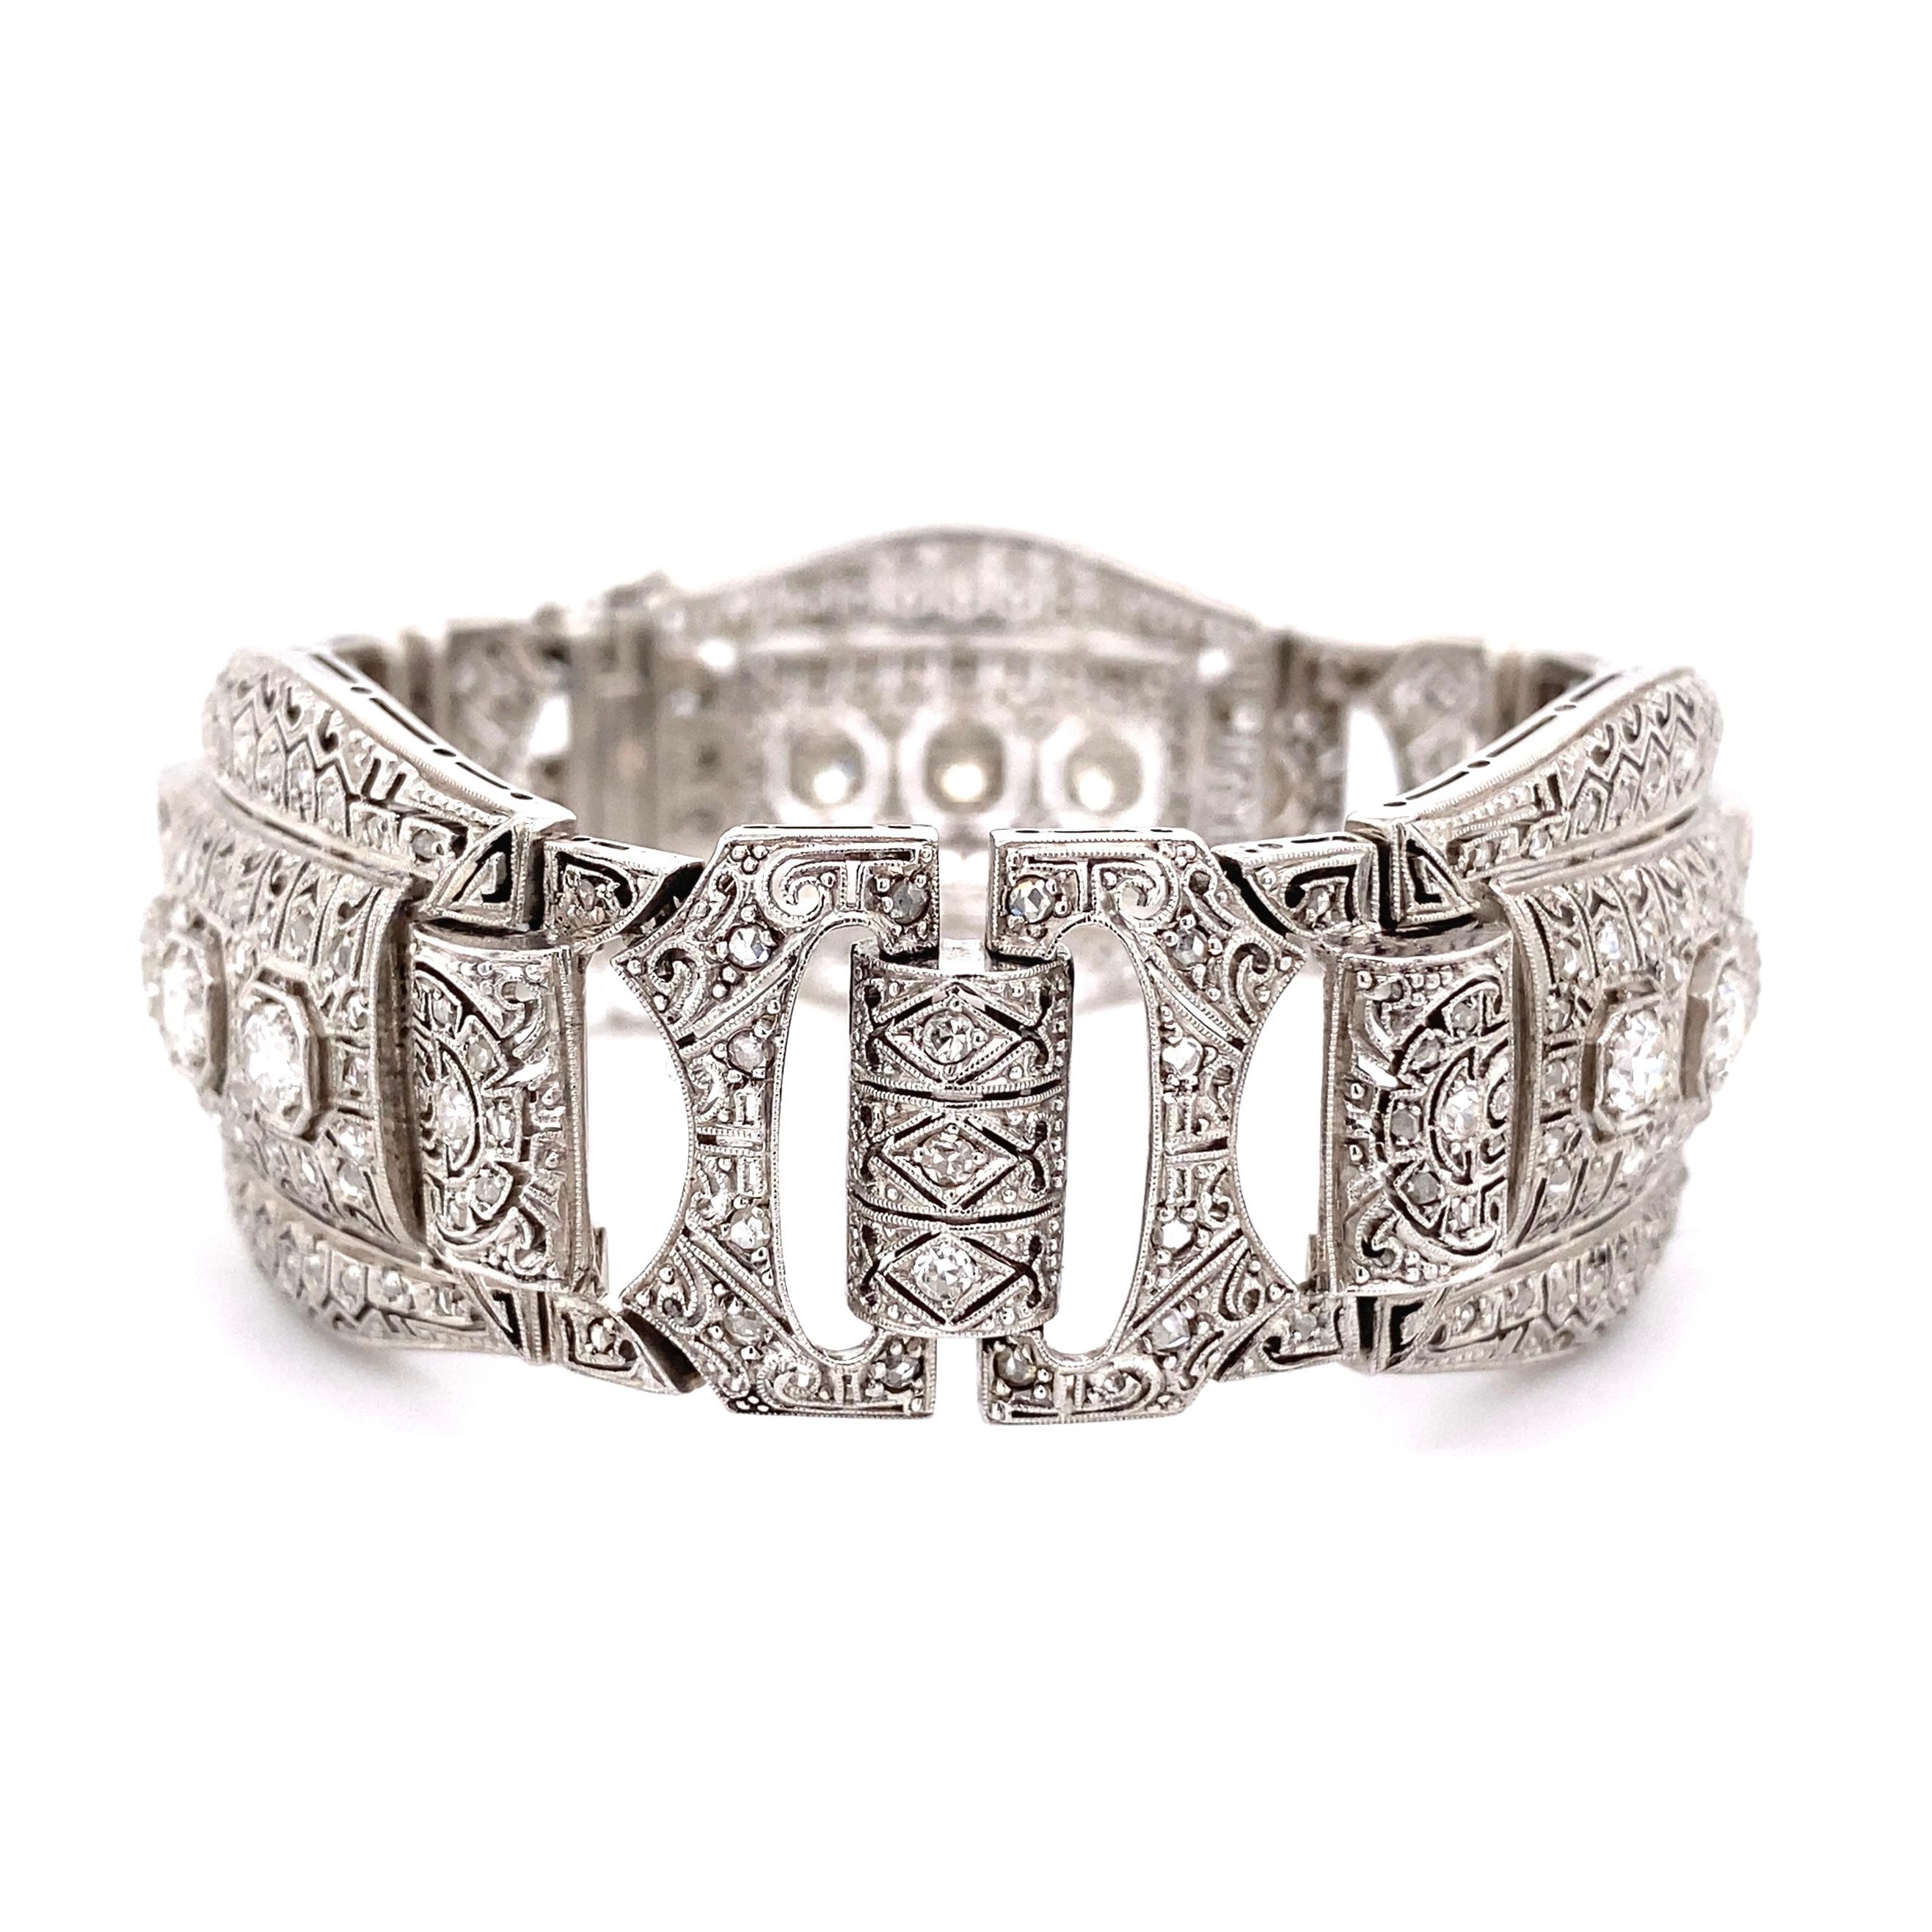 Simply Beautiful and finely detailed Art Deco Diamond Platinum Bracelet. Hand crafted Filigree 3 section design. Hand set with 234 old European cut, Rose cut and Old cut Diamonds, weighing approx. 6.20tcw. Bracelet measures approx. 7